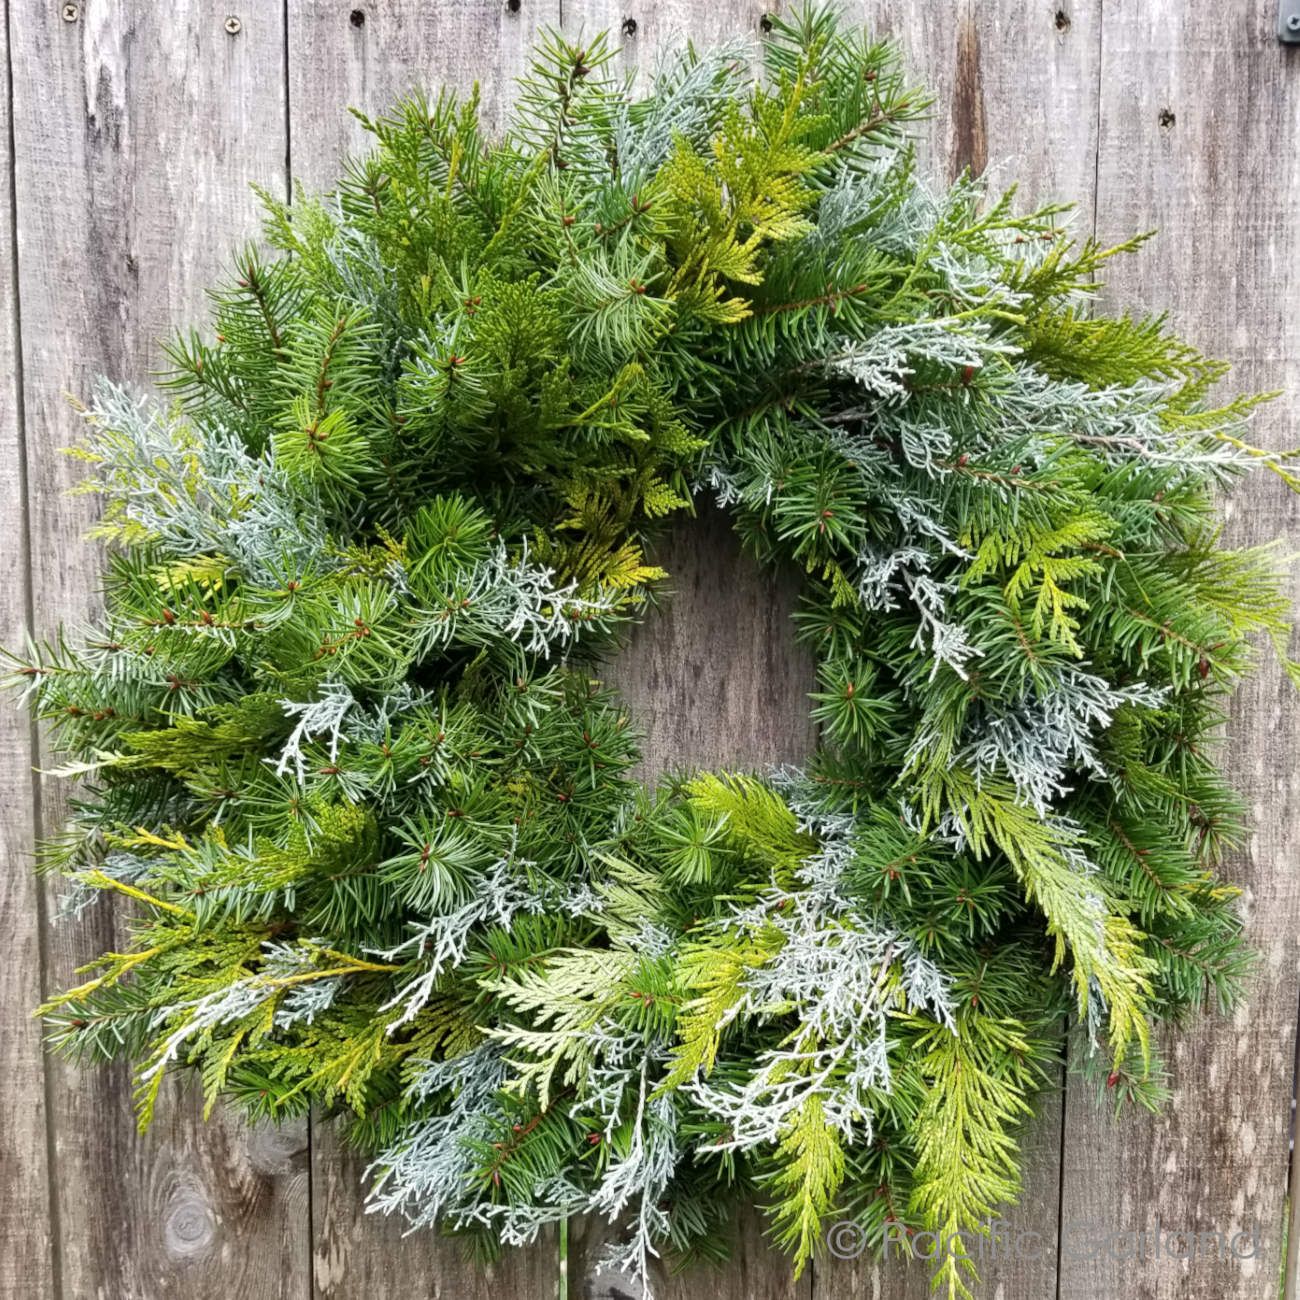 Mixed Evergreen Wreath on 12" Wire Frame